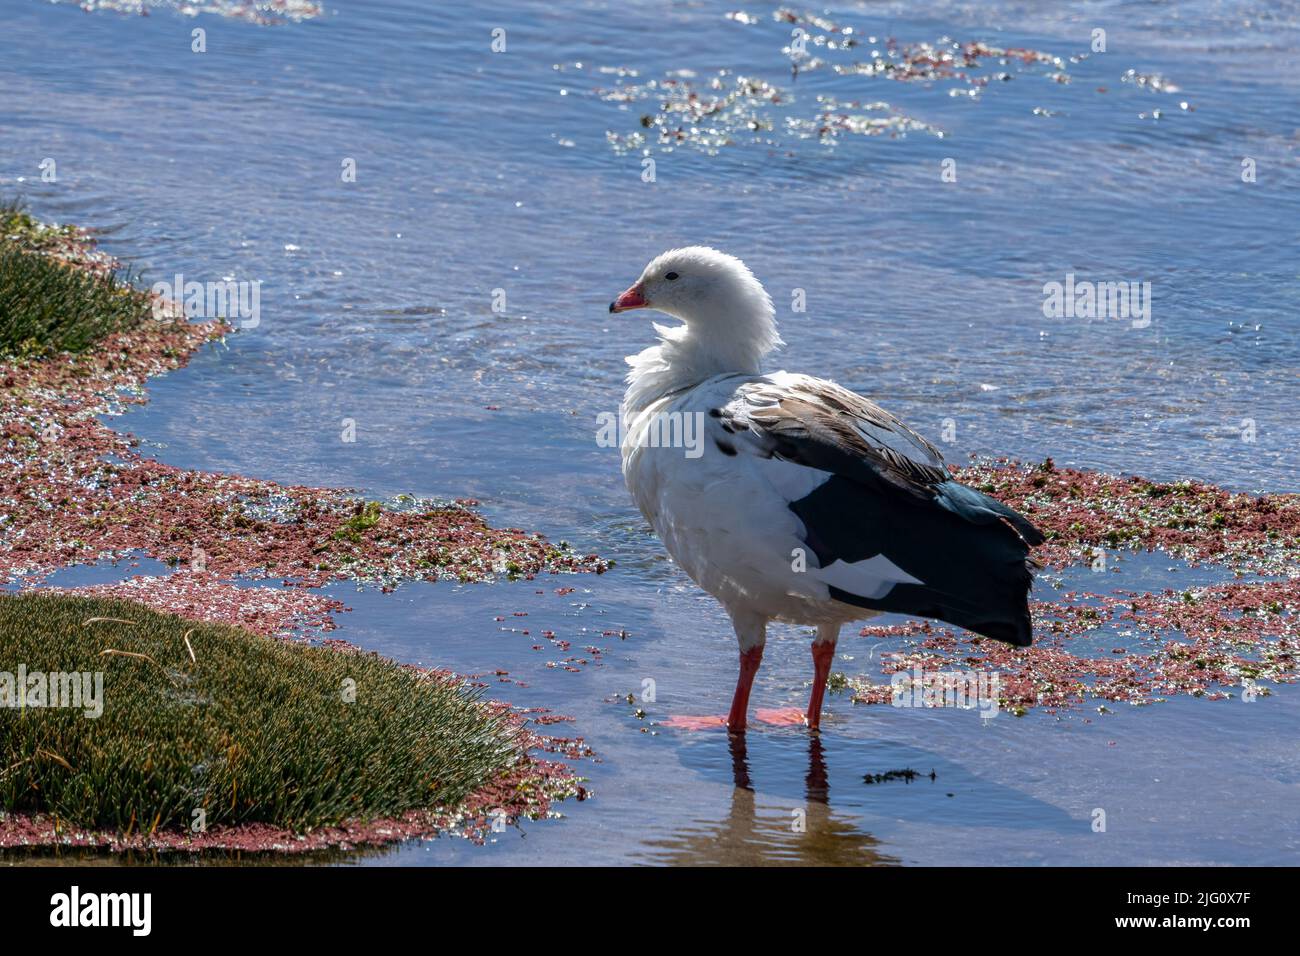 An Andean Goose, Chloephaga melanoptera, in a bofedal or wetland in Lauca National Park on the altiplano in Chile. Stock Photo